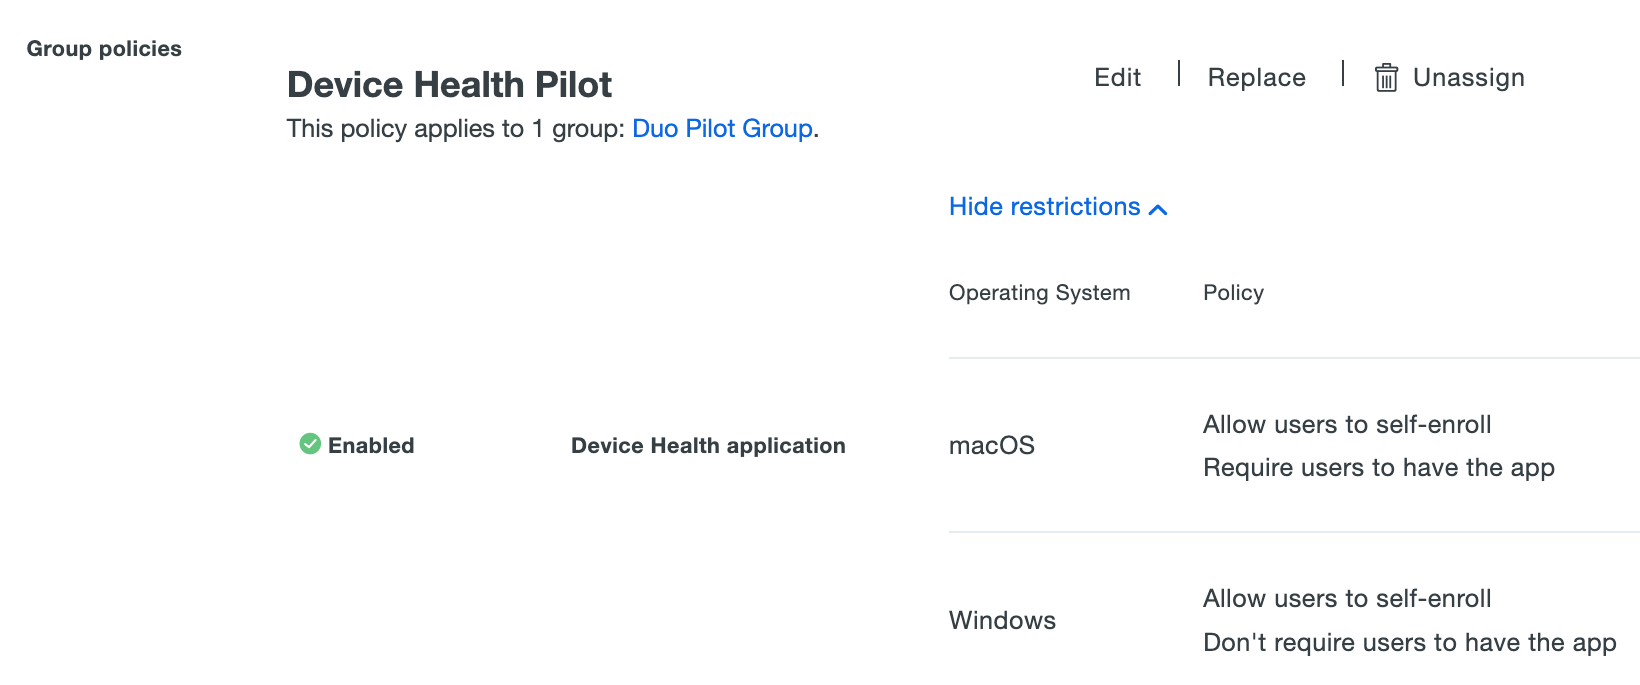 Applied Device Health Application Group Policy